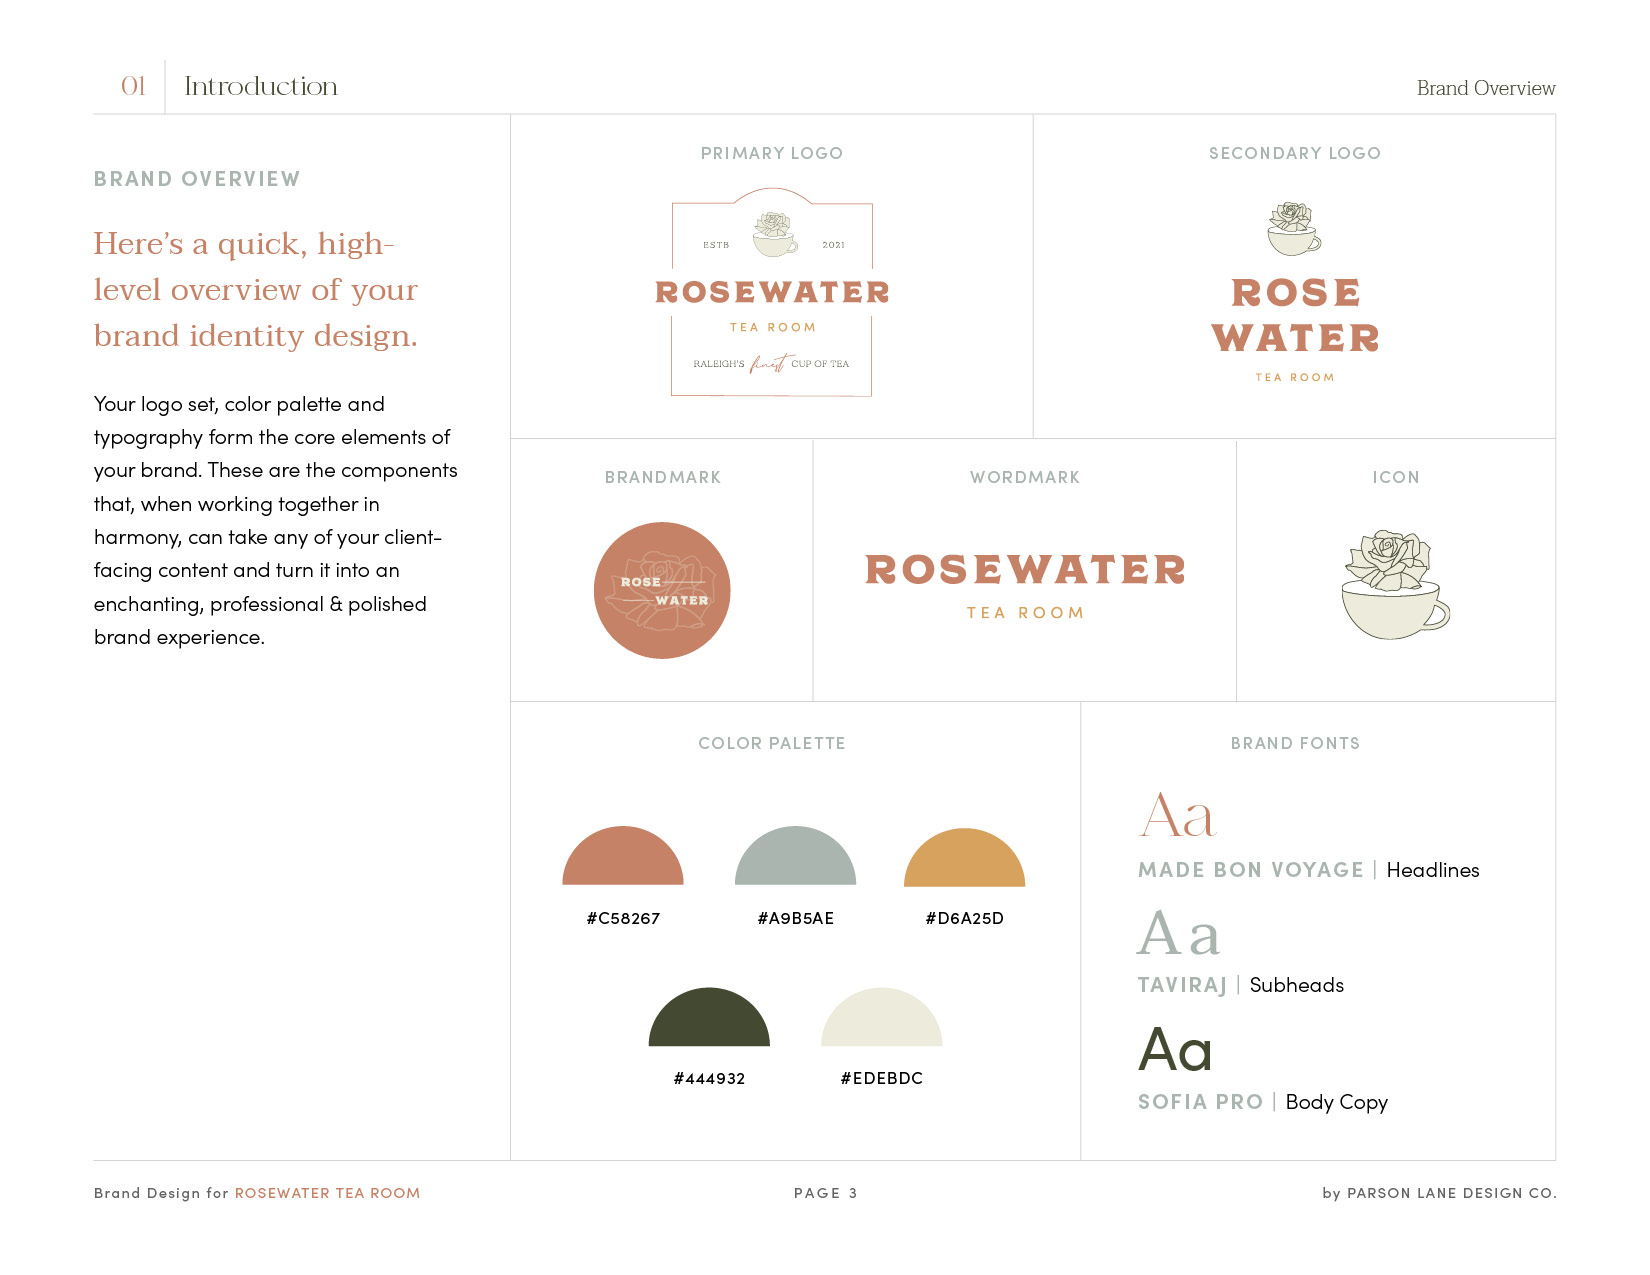 A screenshot of the brand overview page in the Parson Lane brand manual, including information about the logo set, color palette, and brand fonts.